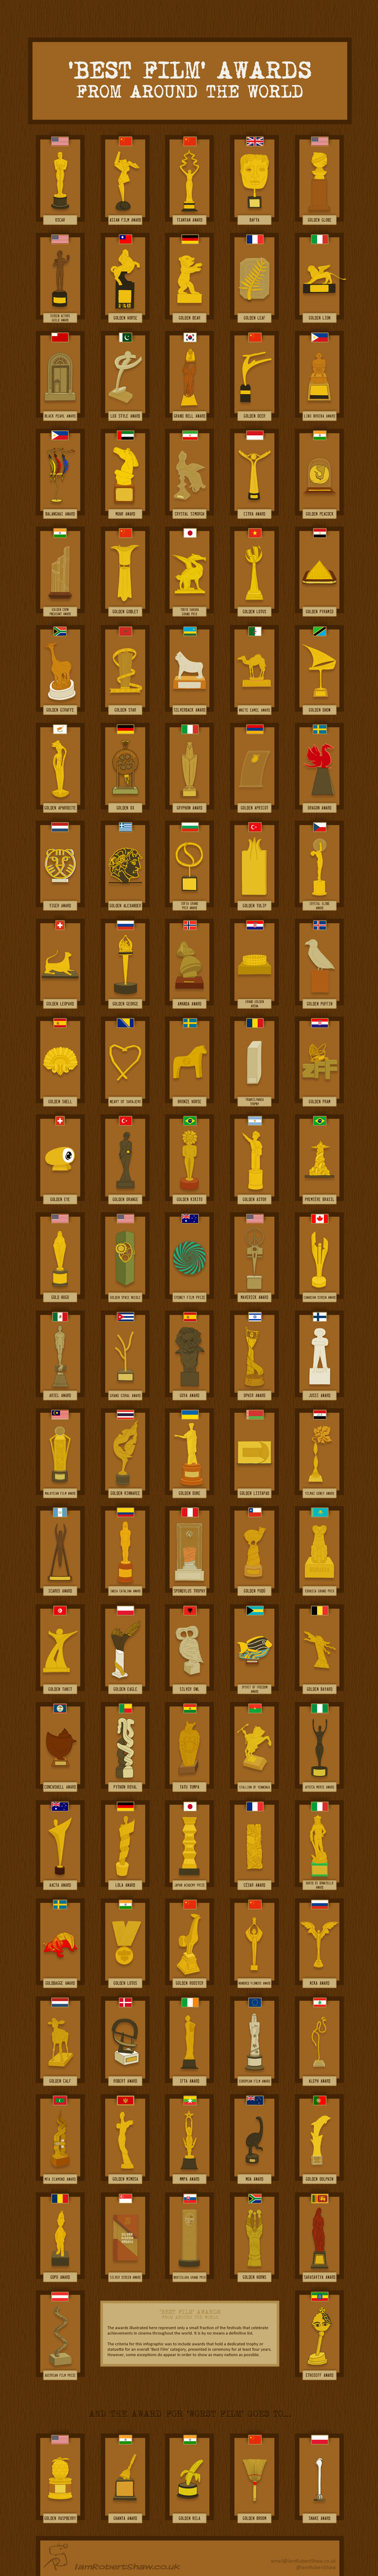 'Best Film' Awards From Around the World infographic